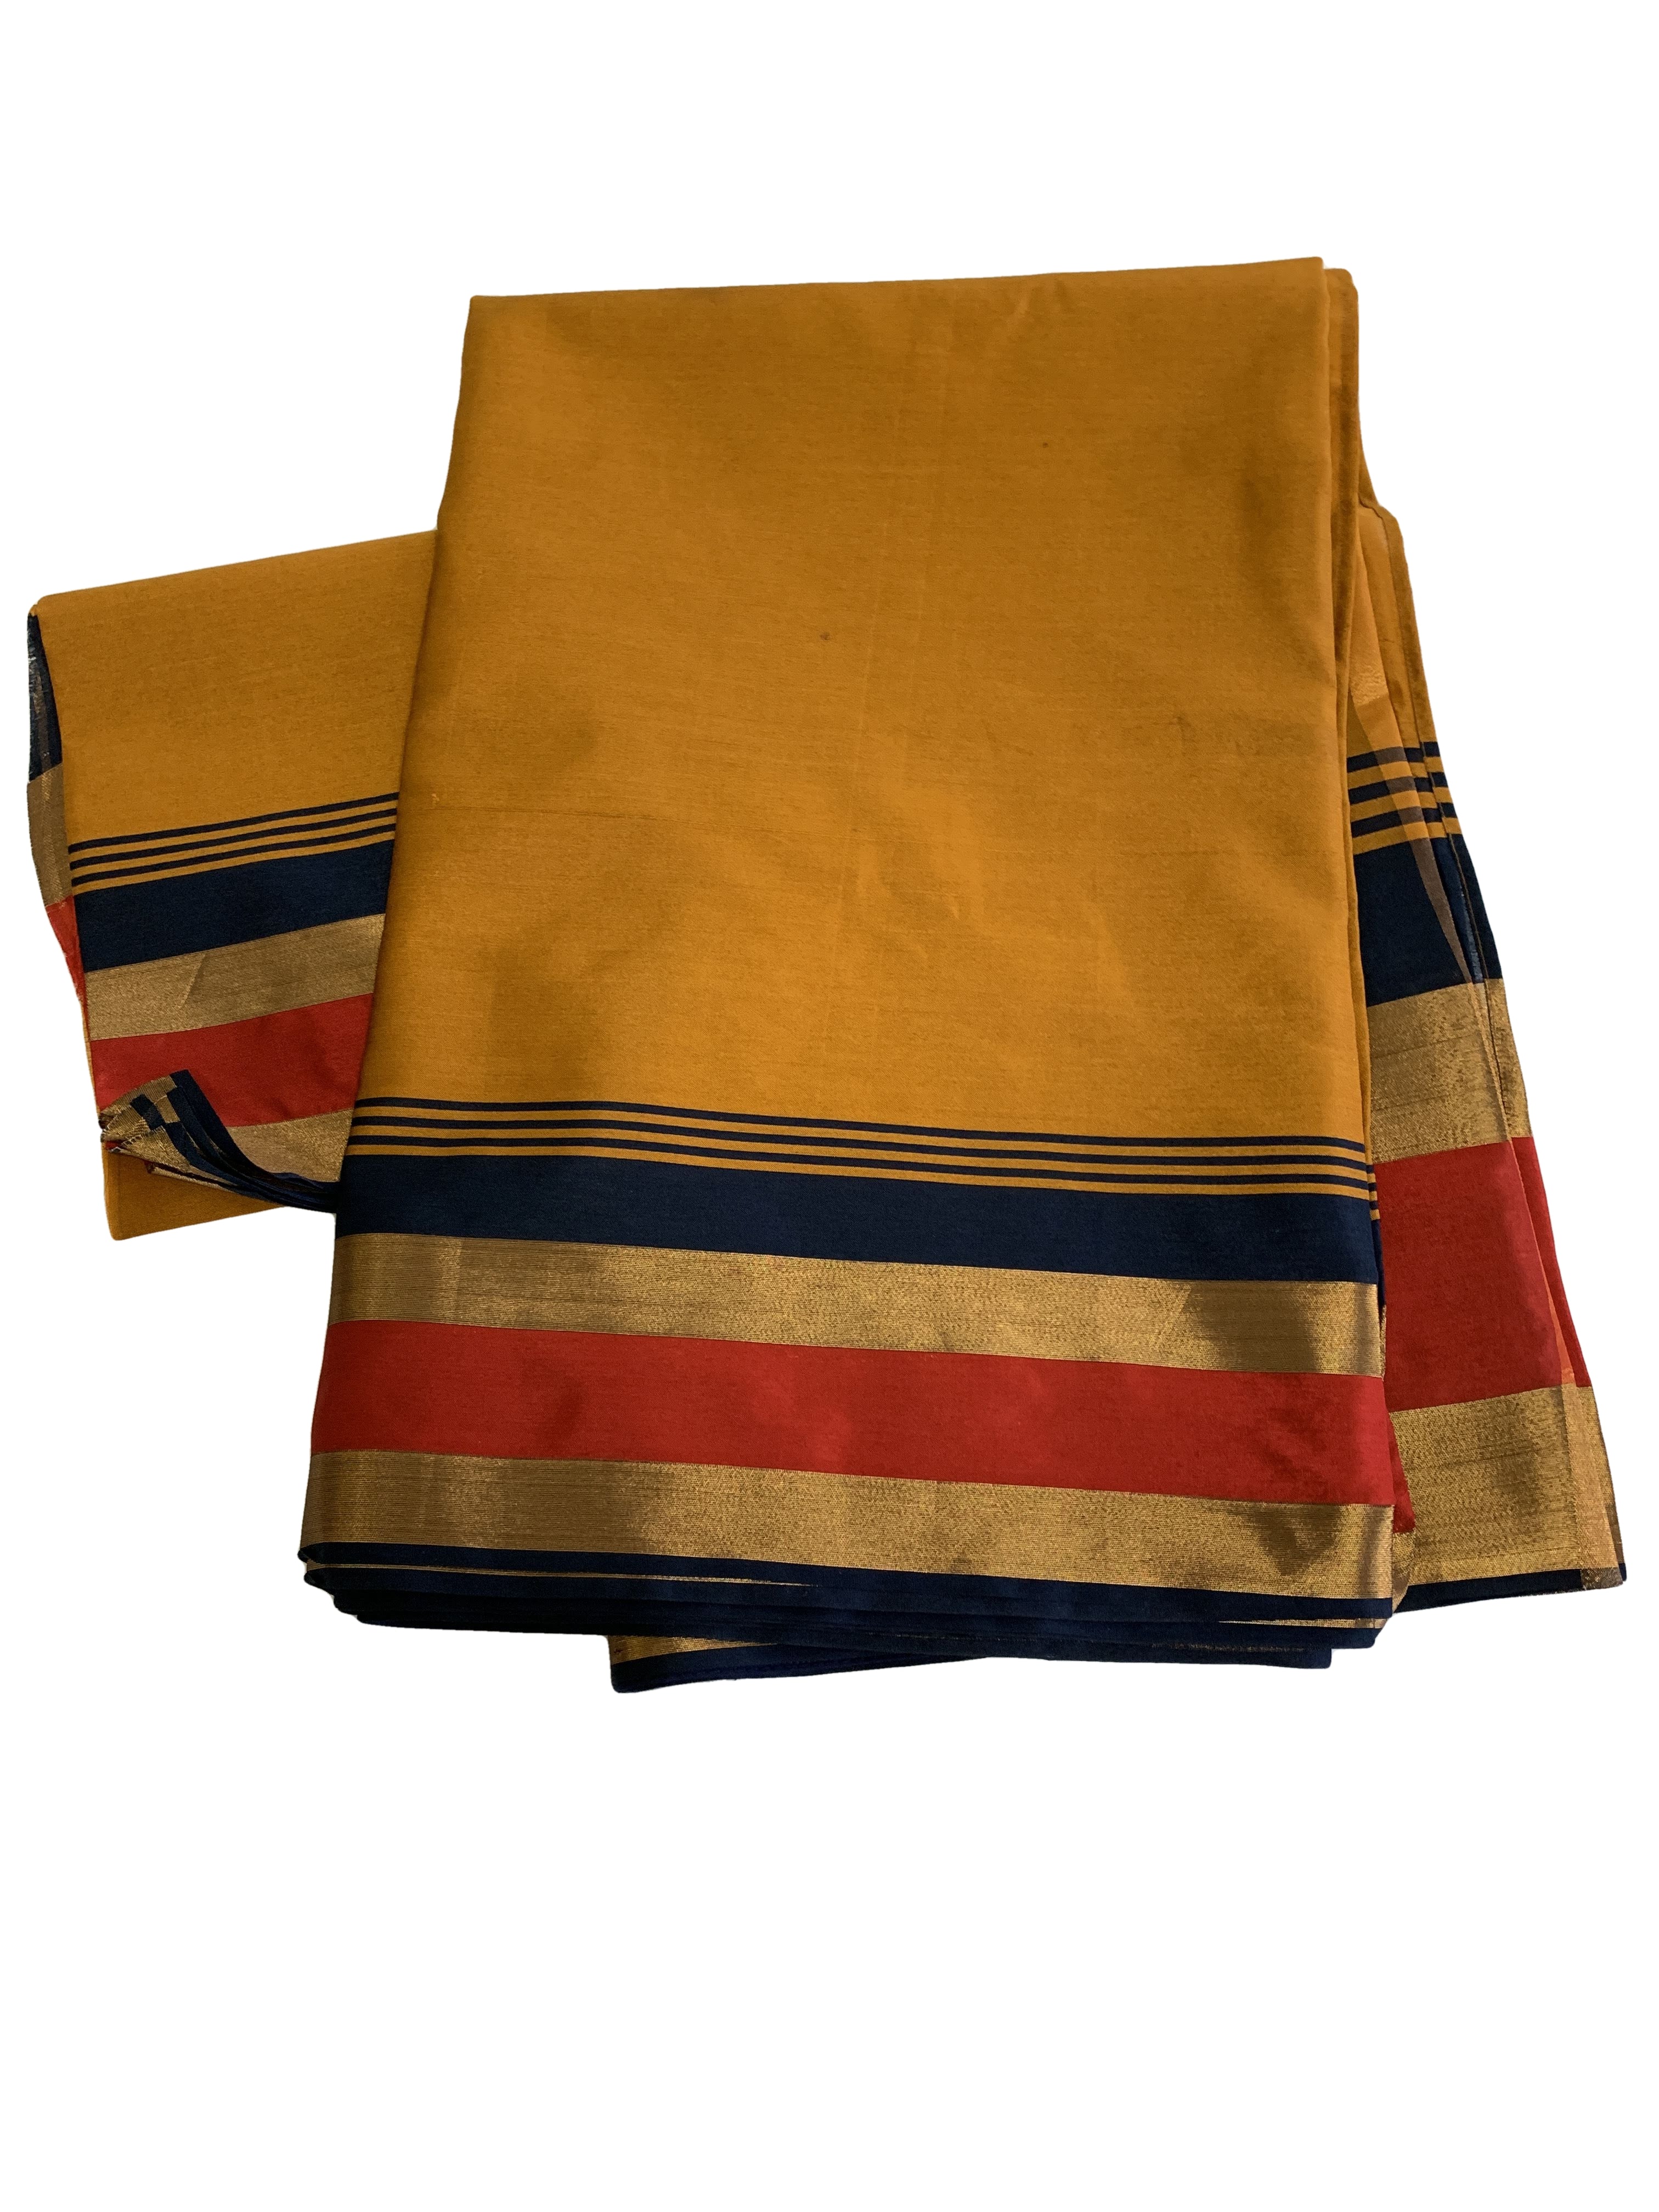 Soft Silk Saree - Dark Yellow Color - Gold, Blue and Red Color Border